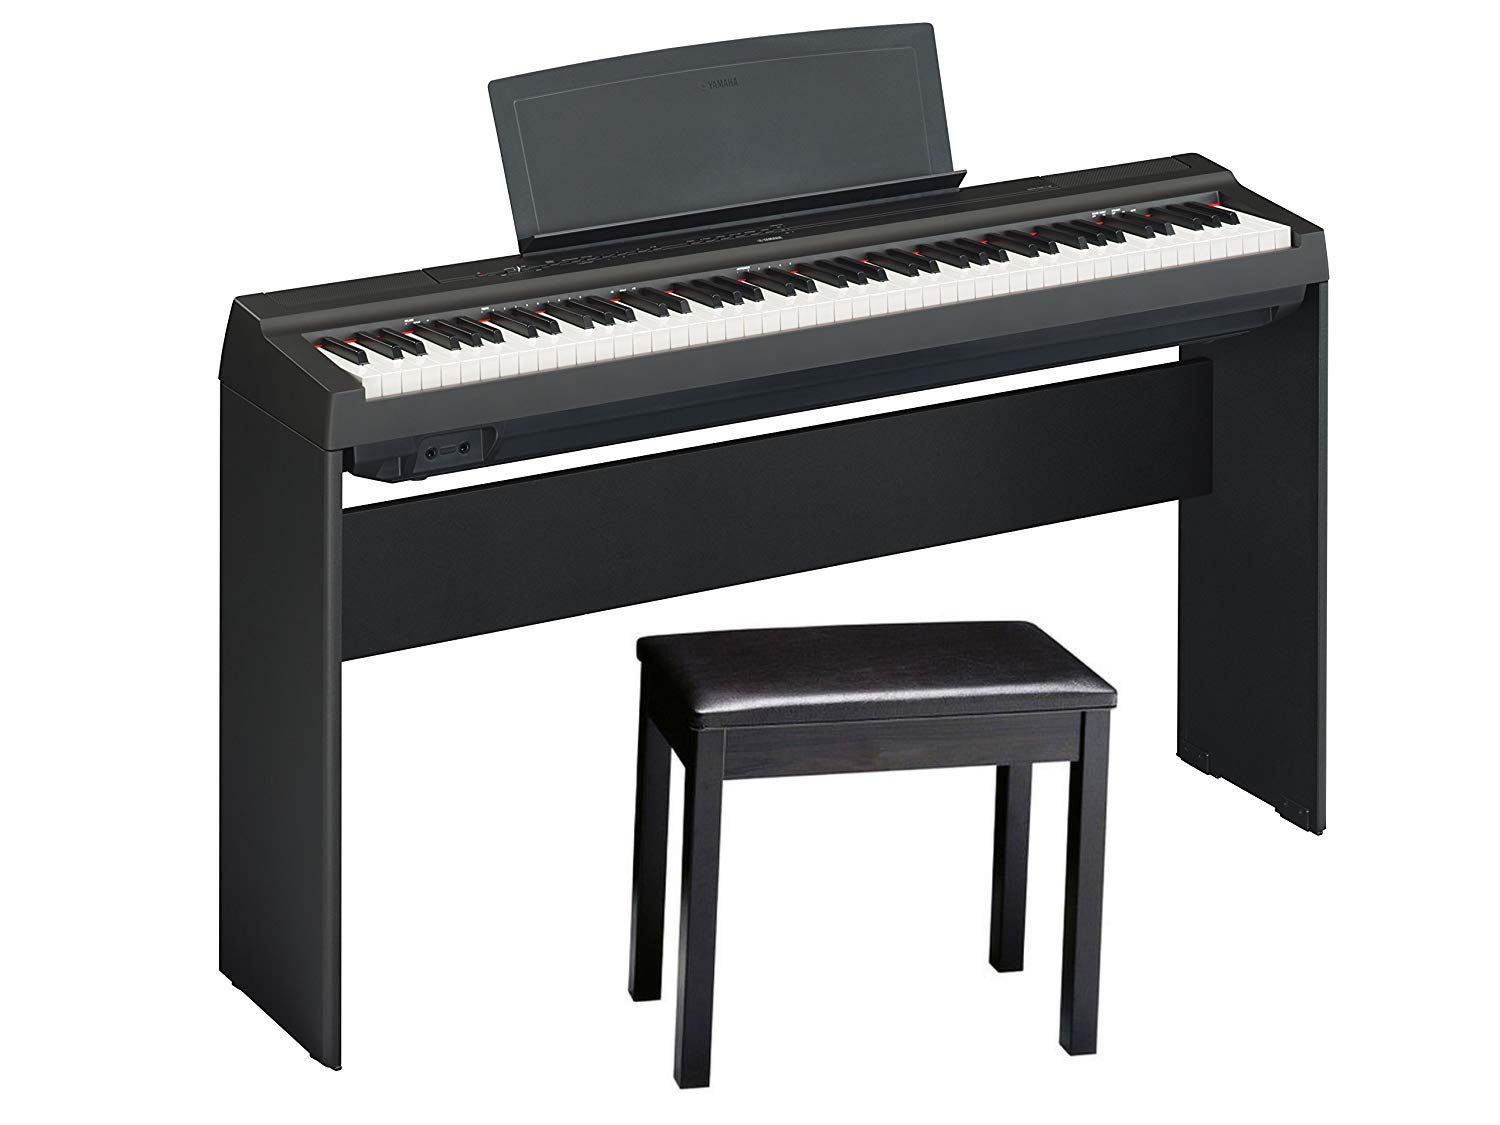 
U3 Yamaha Piano Price: Is It Worth The Investment? Find Out Here!